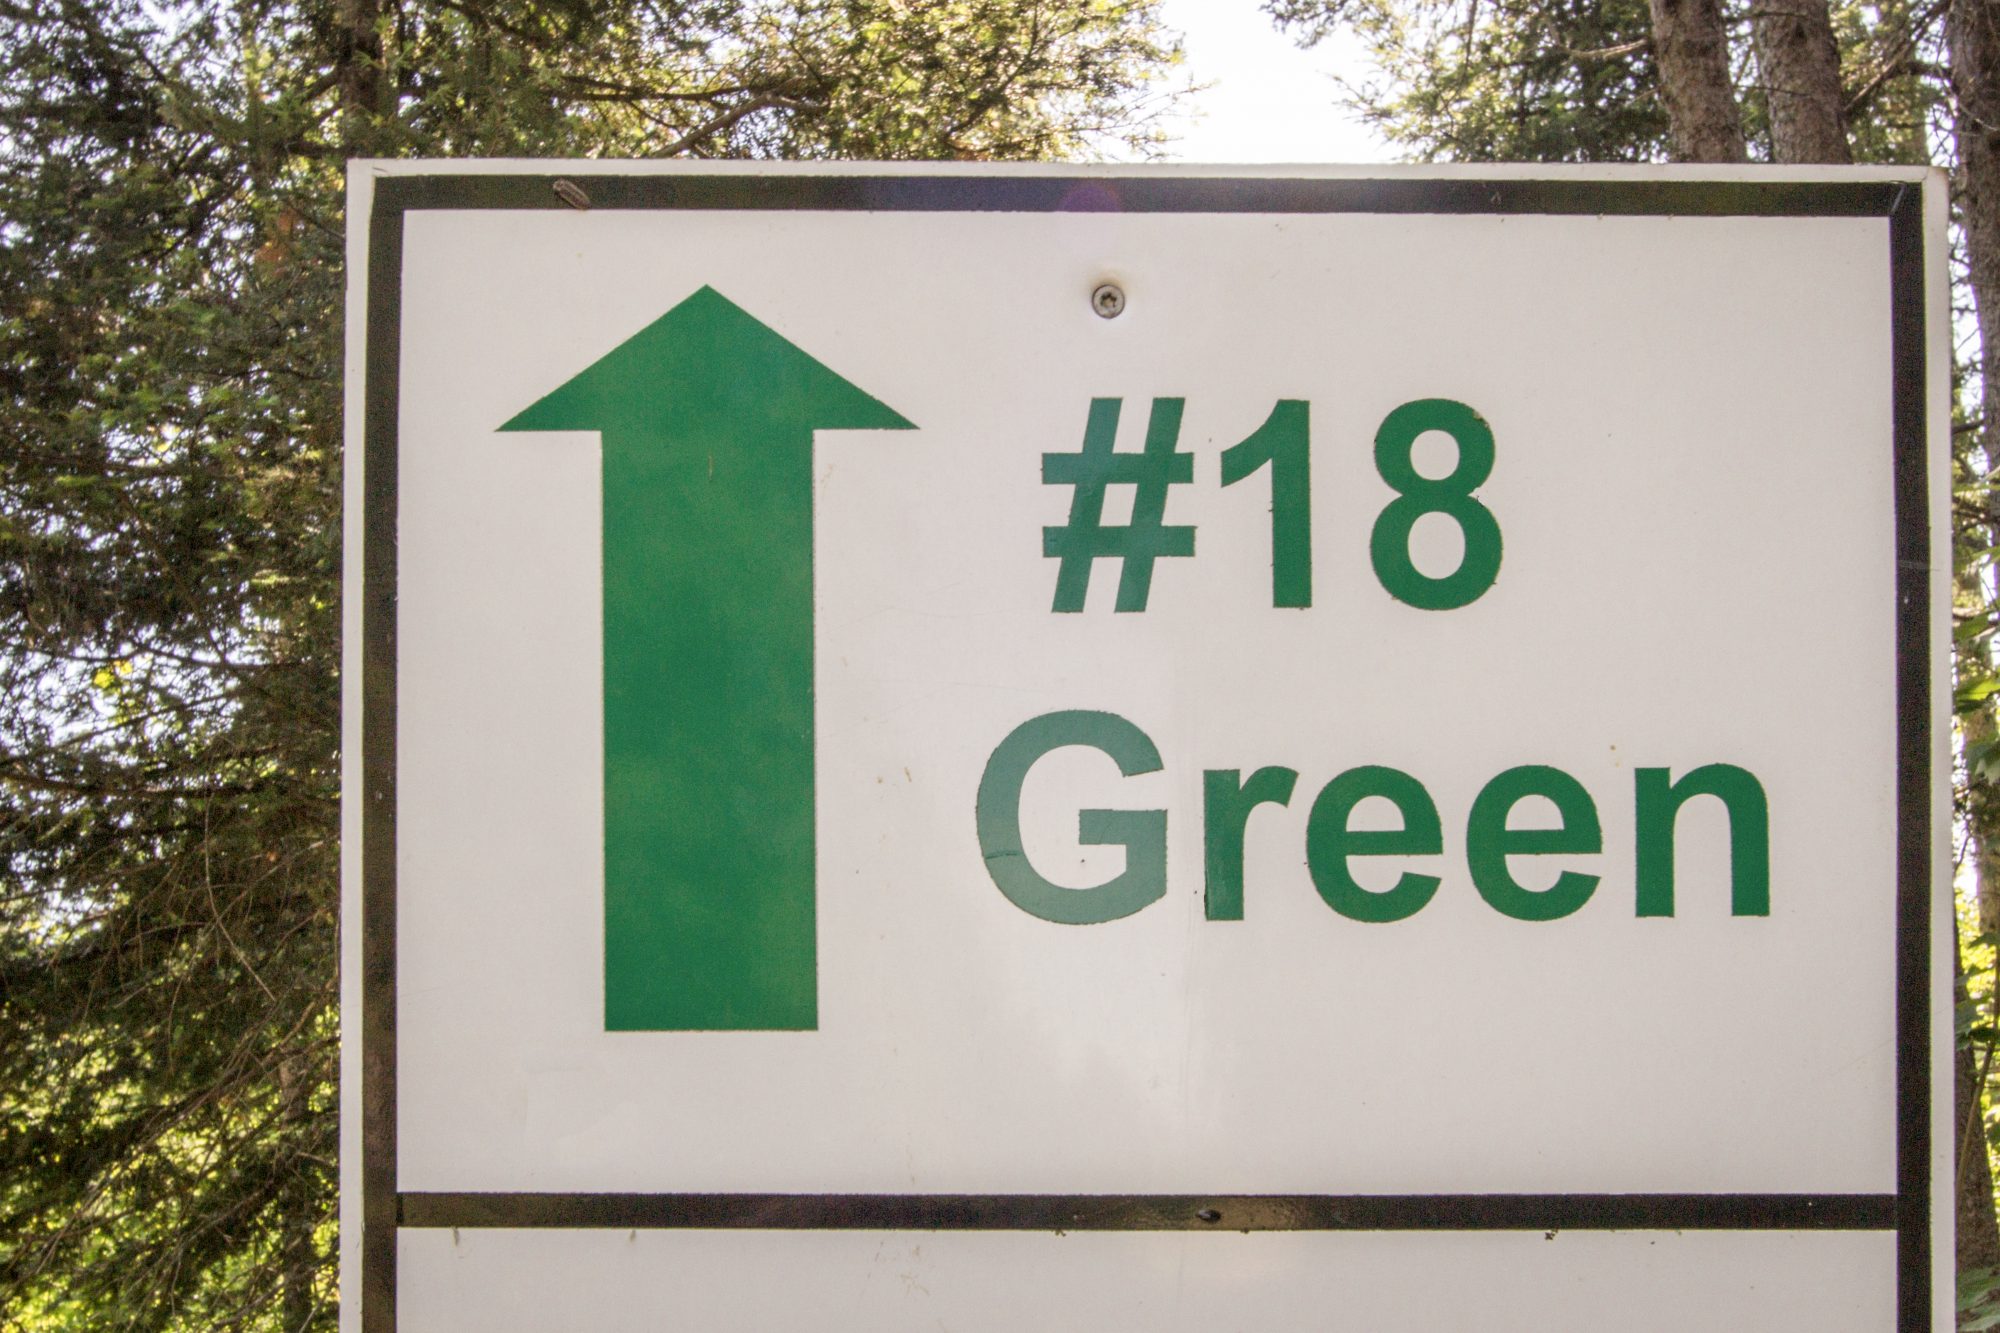 The Eighteenth Green. Directional sign for the 18th green on a golf course. ehrlif - stock.adobe.com